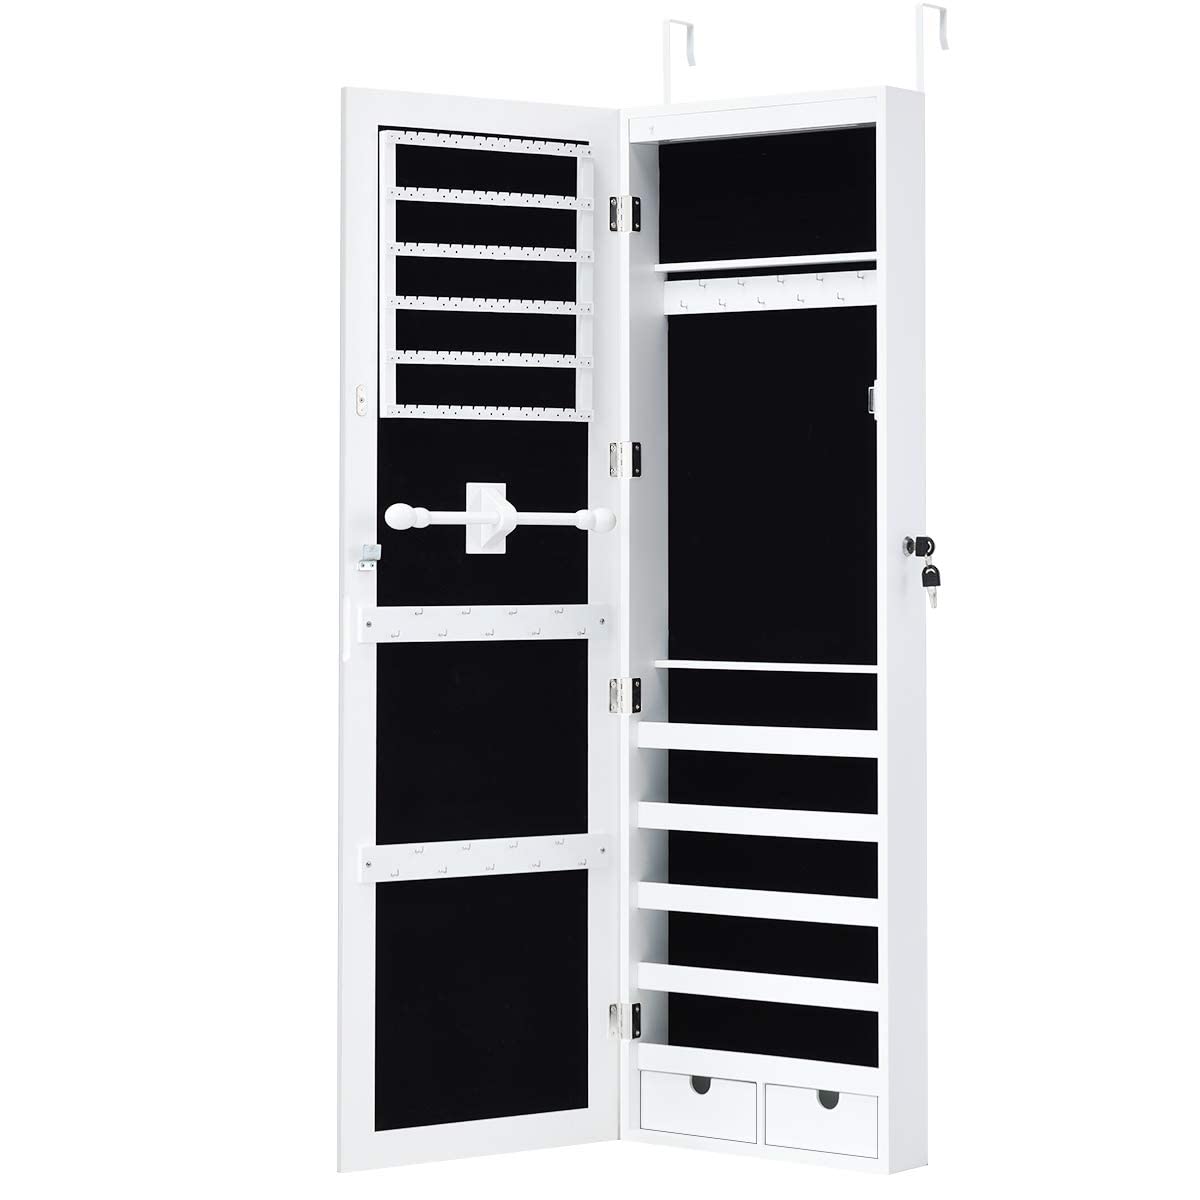 Giantex Wall Door Mount Jewelry Armoire Cabinet with 15 LED Lights, Lockable Hanging Jewelry Cabinet Organizer with Large Storage Capacity